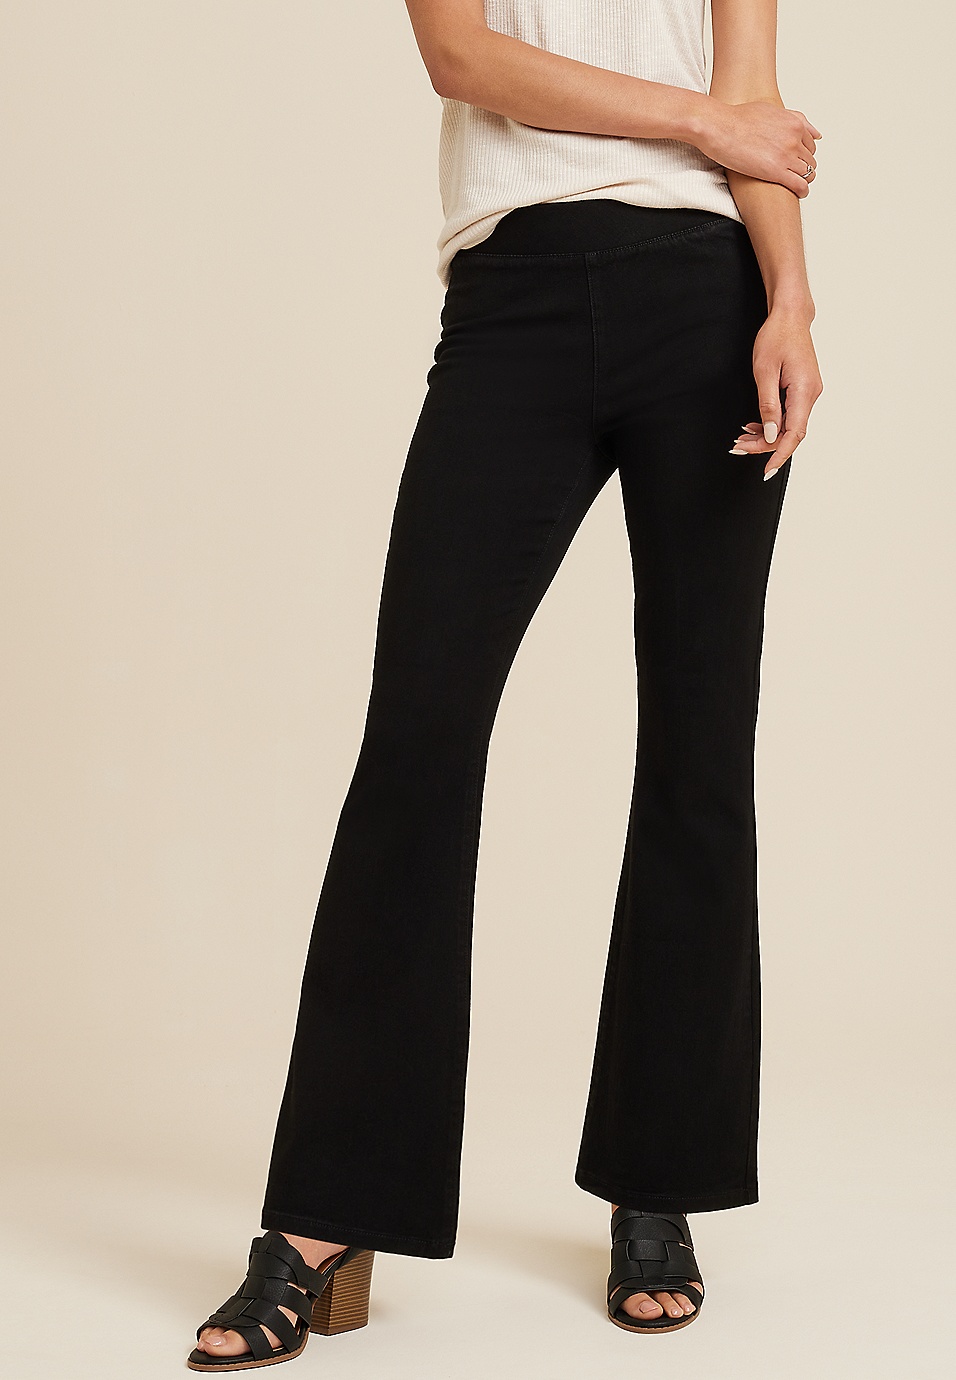 Higher High-Waisted Black Flare Jeans for Women